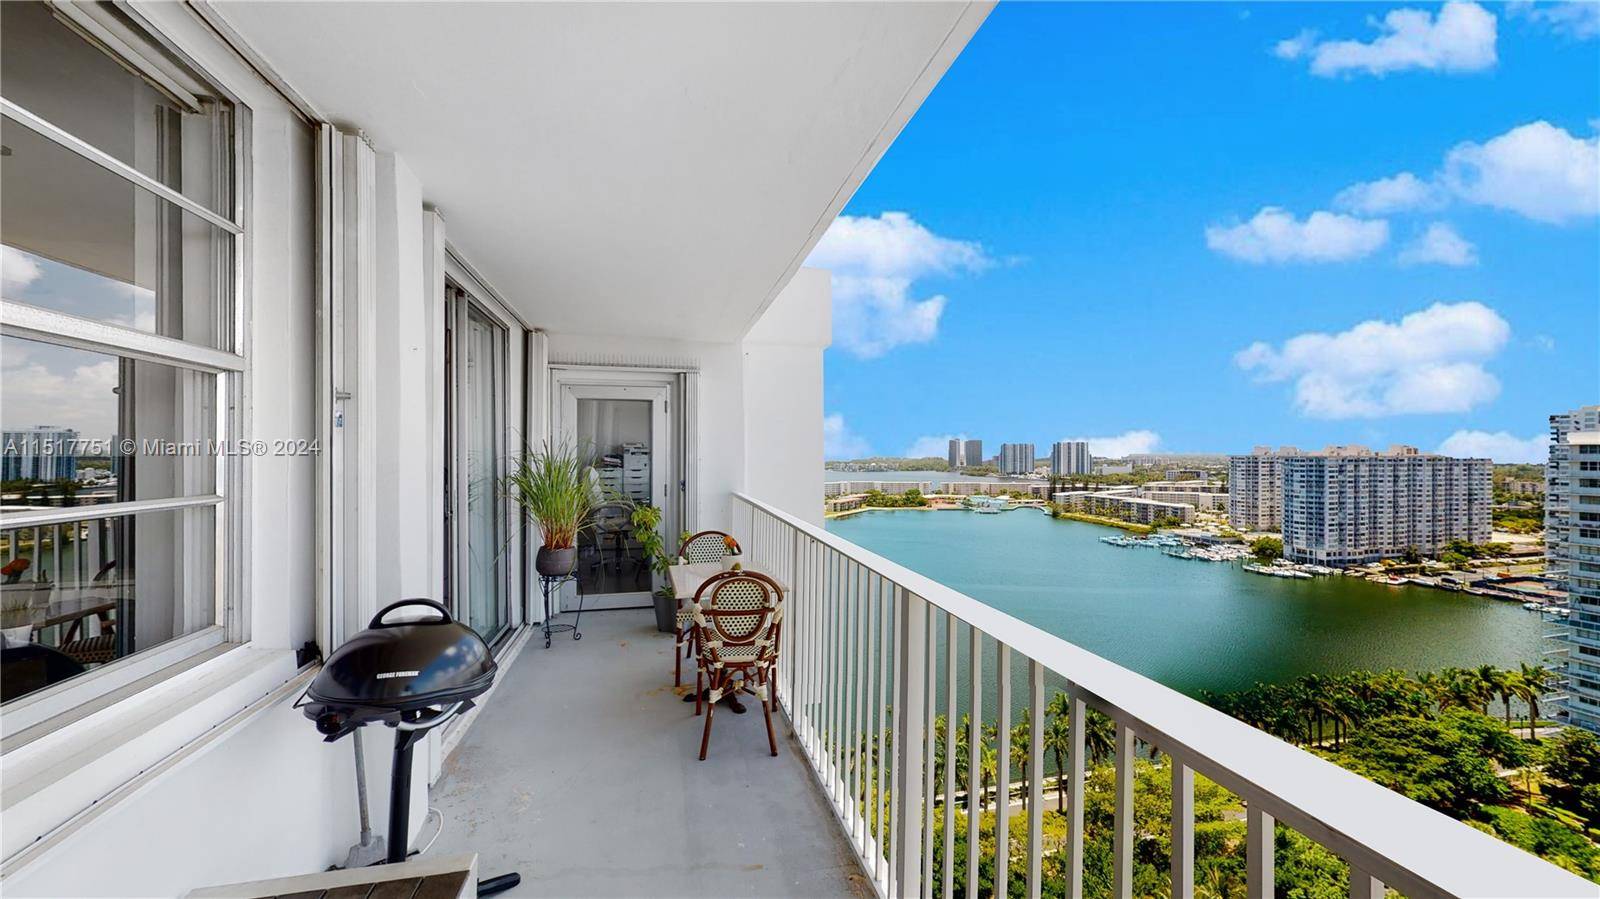 Penthouse beautifully remodeled split unit of 2 2 with high ceiling large balcony overlooking West.